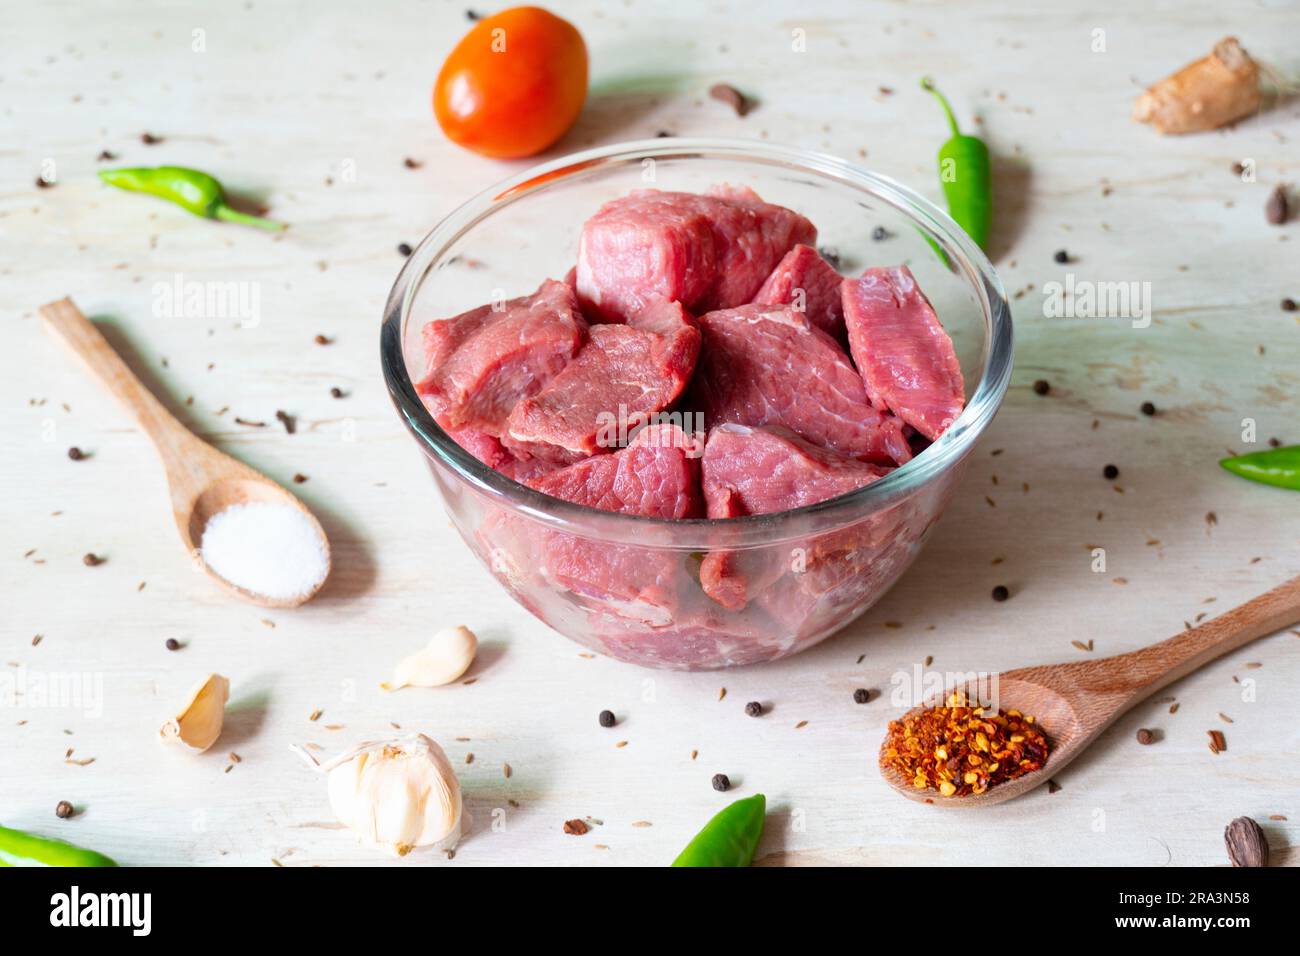 Is It Safe to Cook Raw Meat with a Wooden Spoon?